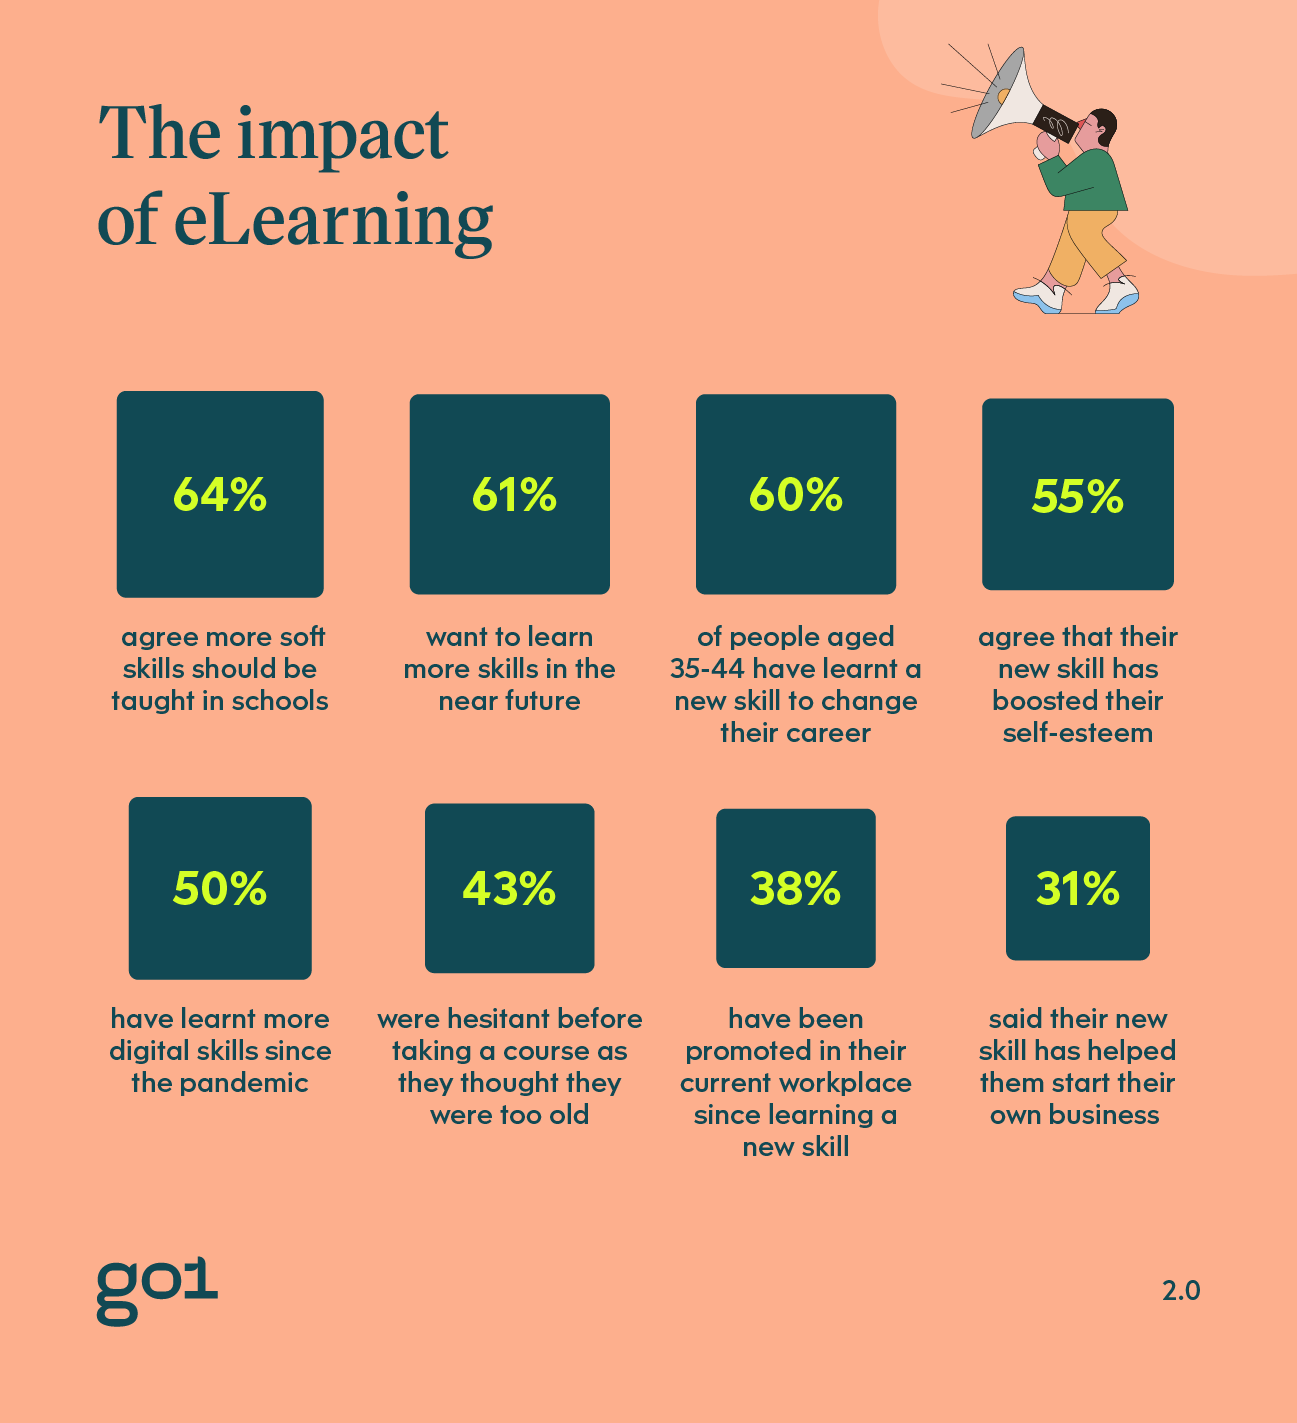 Survey results on the impact of eLearning. 64% agree more soft skills should be taught in schools